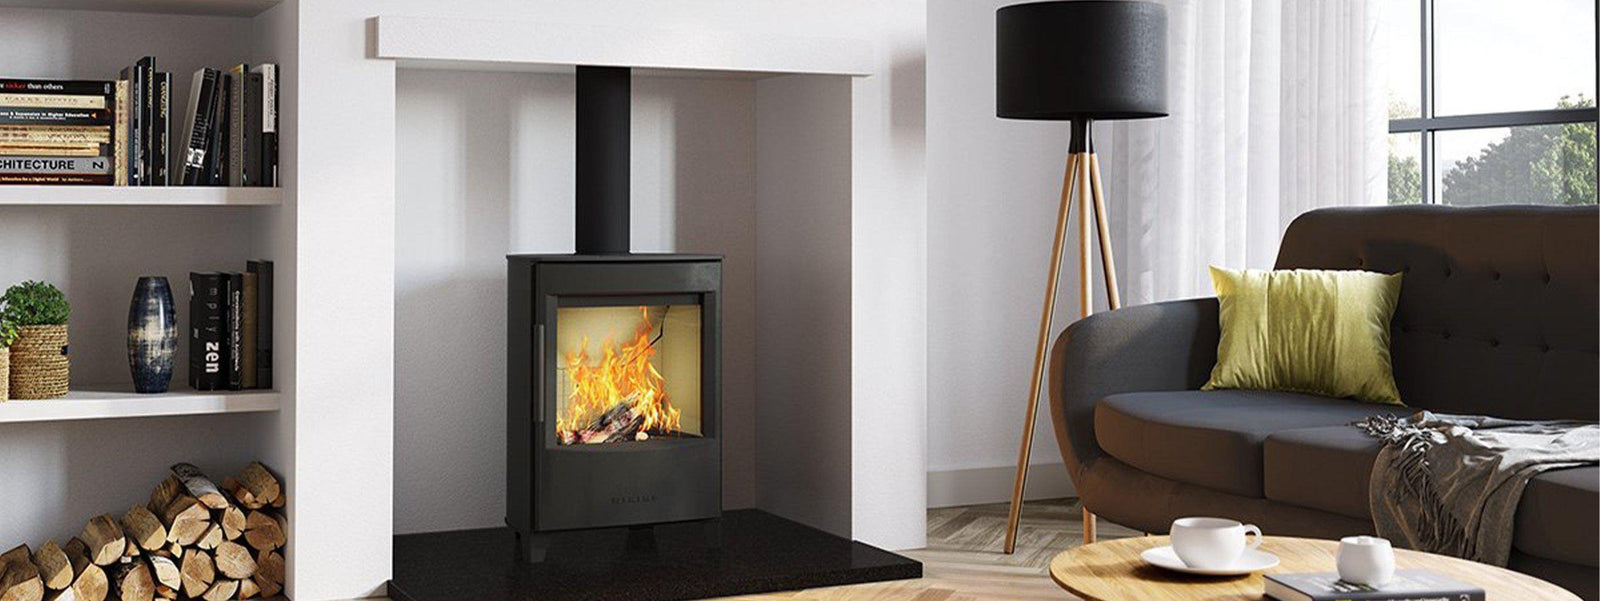 WIKING Stoves | The Stove Yard